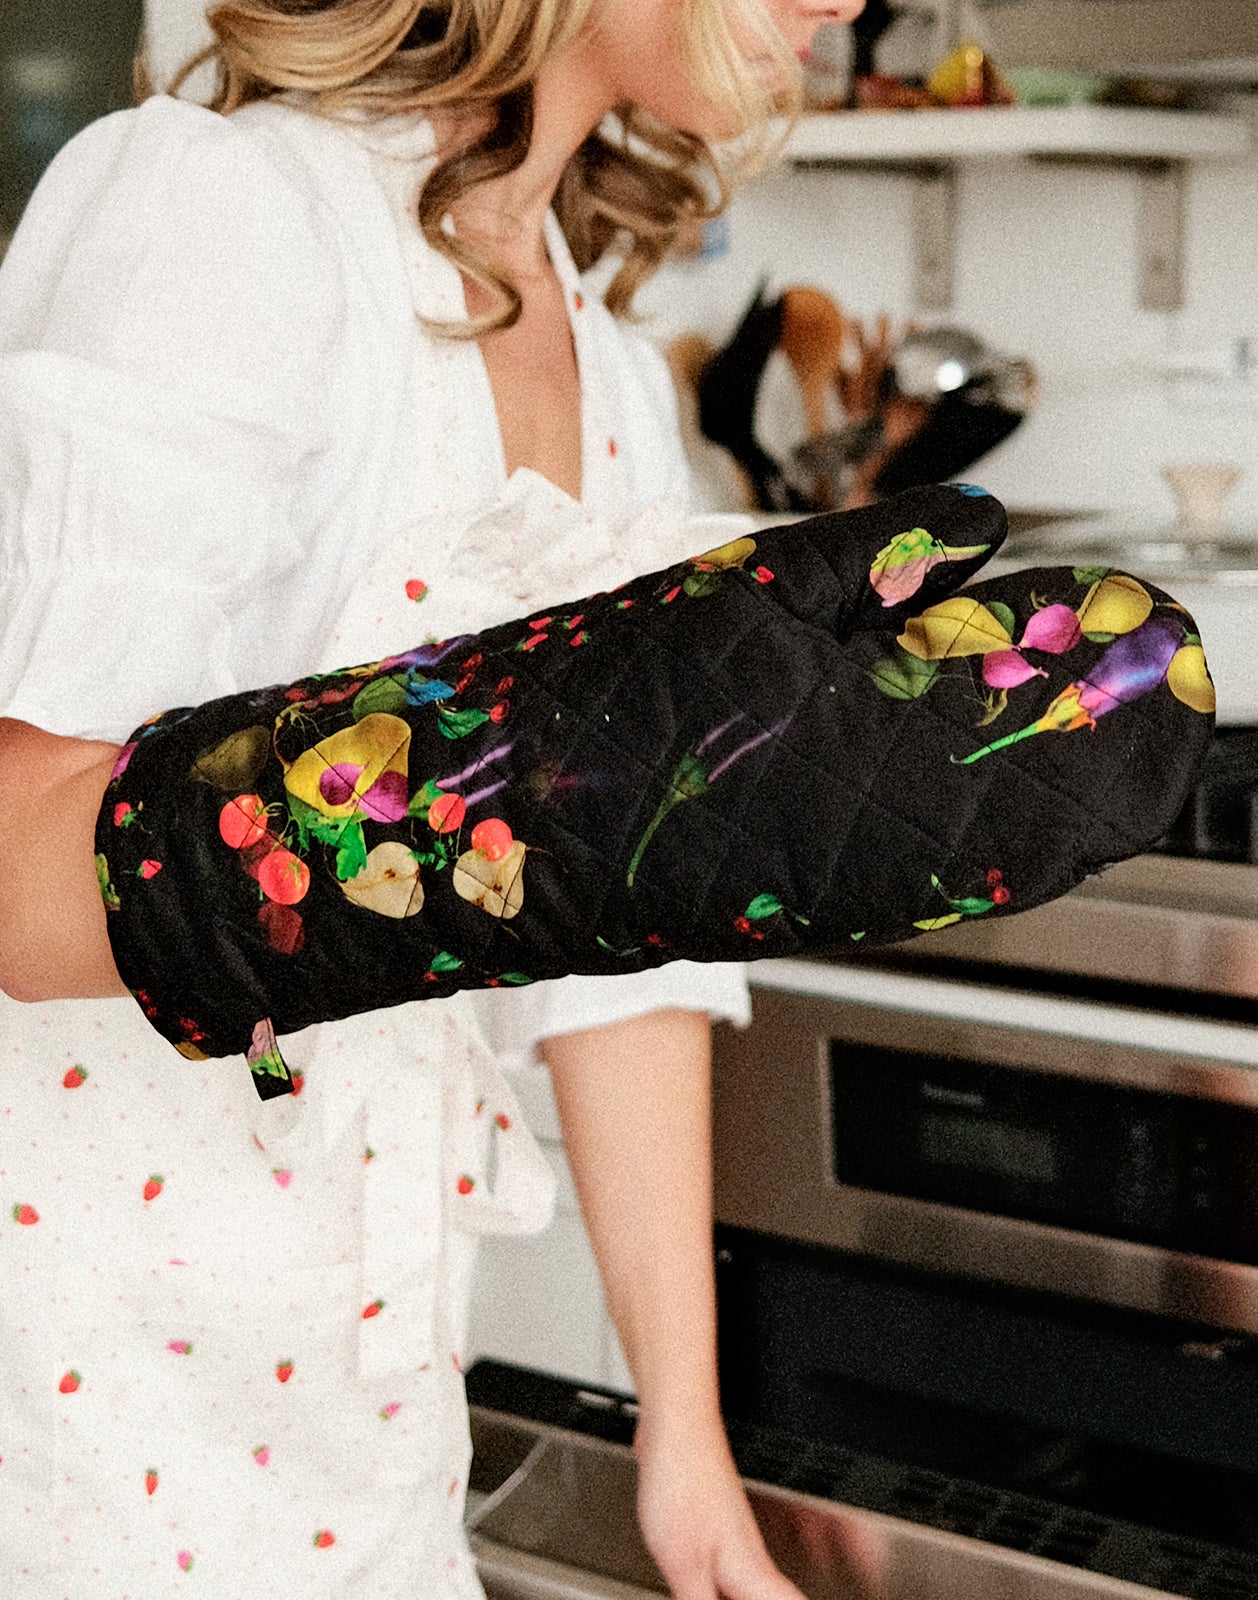 CR x Kit Quilted Oven Mitt